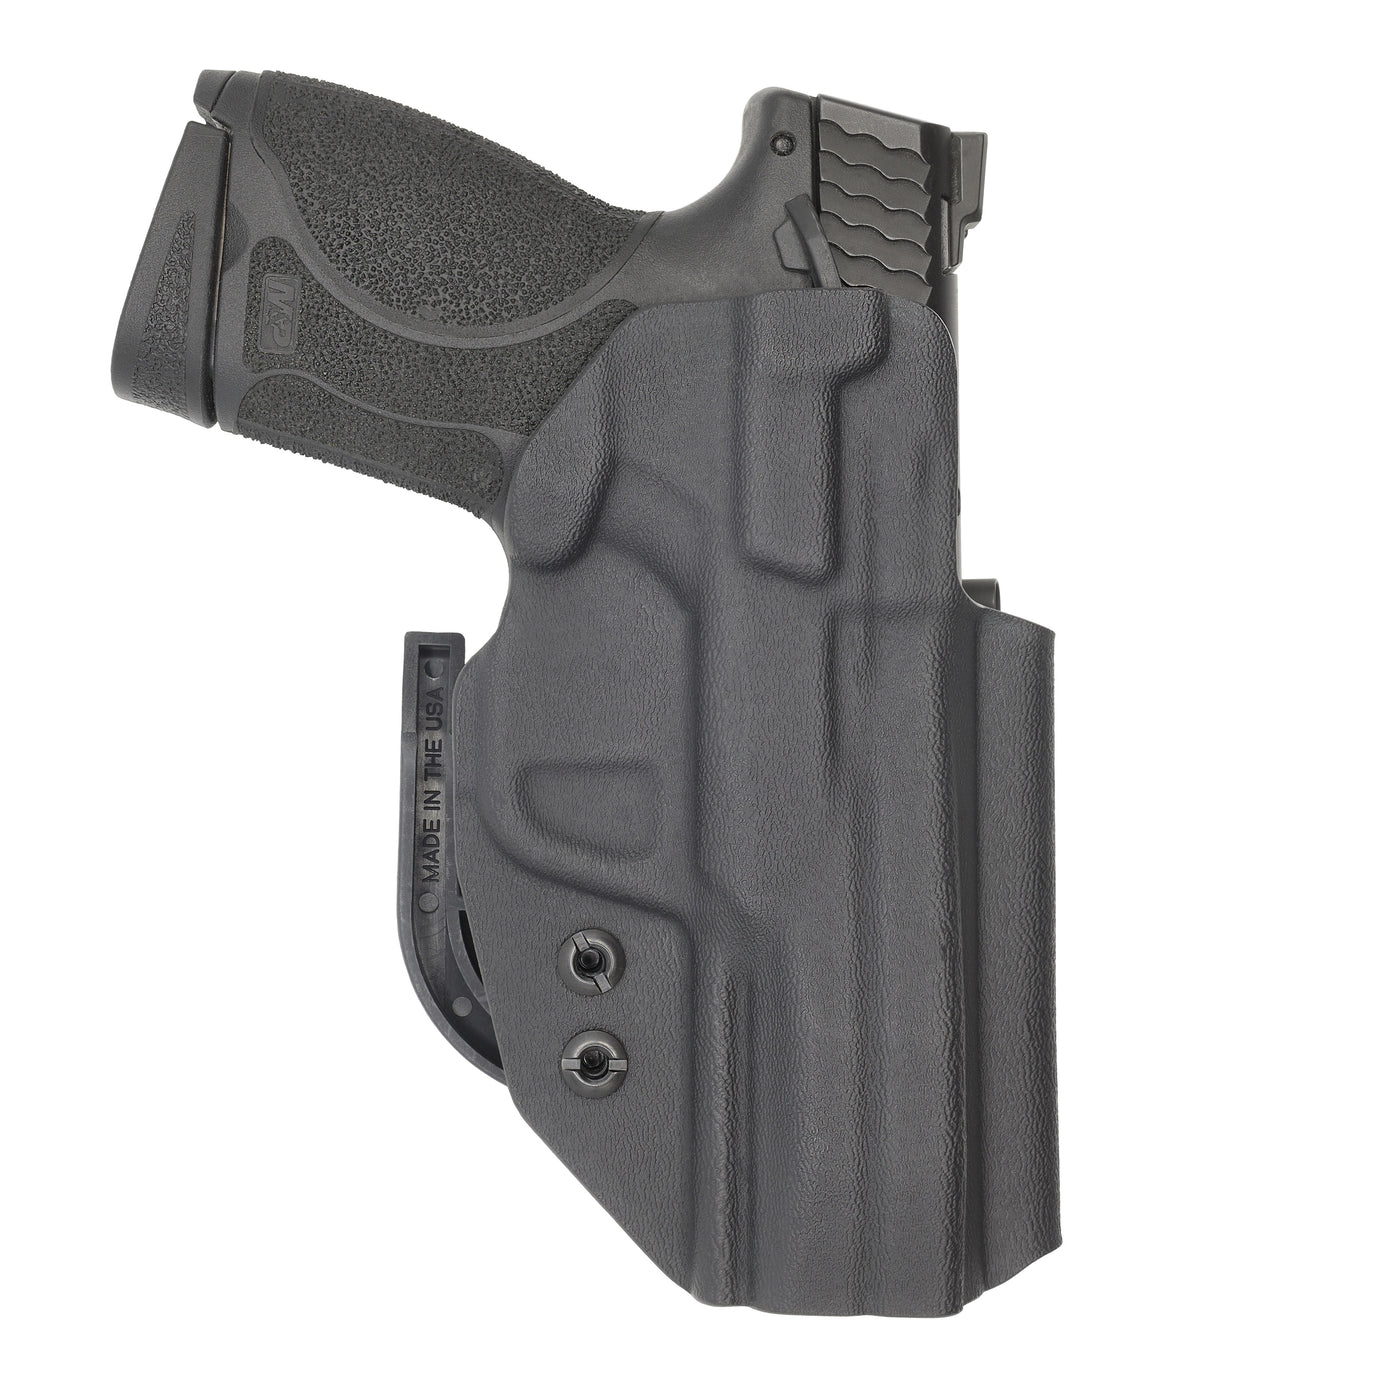 C&G Holsters quickship IWB ALPHA UPGRADE Covert M&P 10/45 4" LEFT HAND in holstered position back view